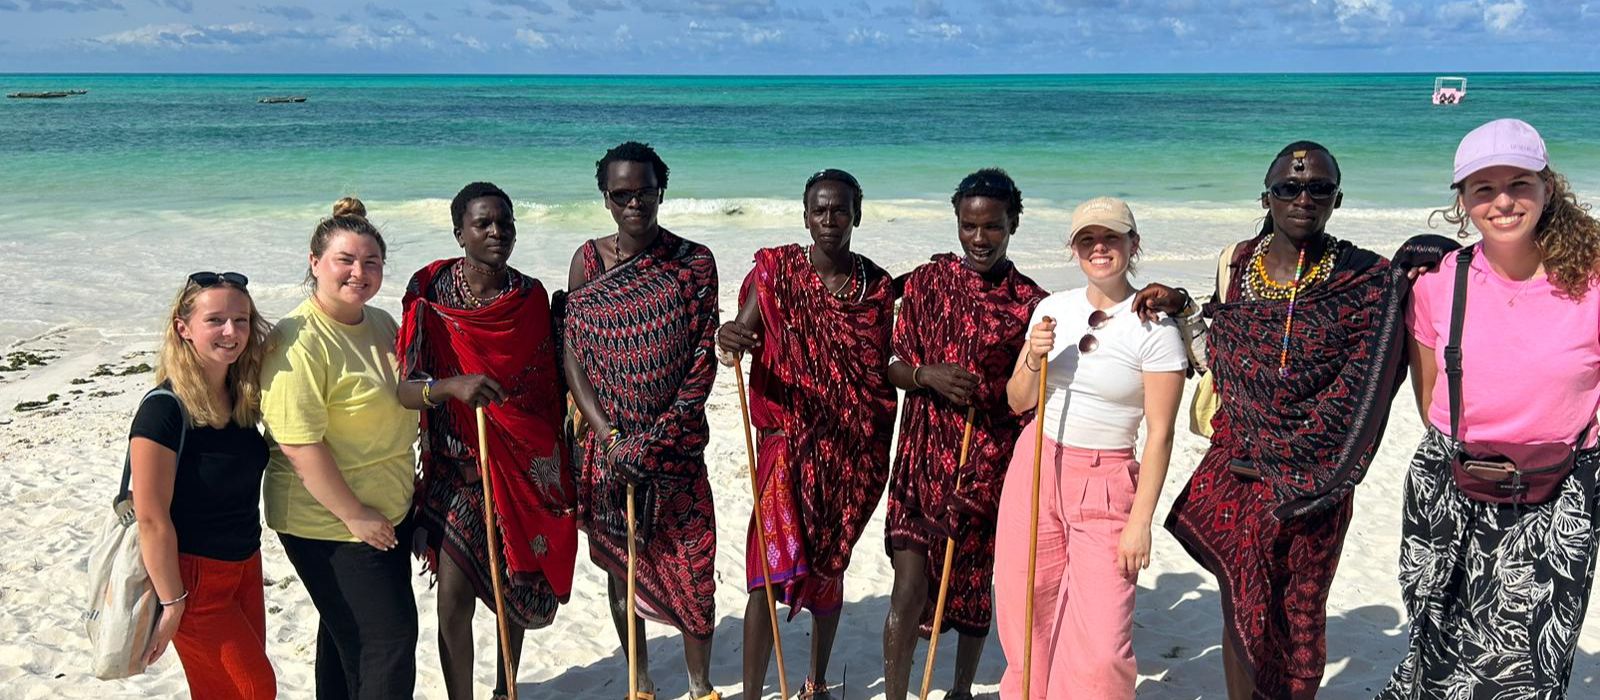 Volunteers and locals in Africa posing for a photo on the beach